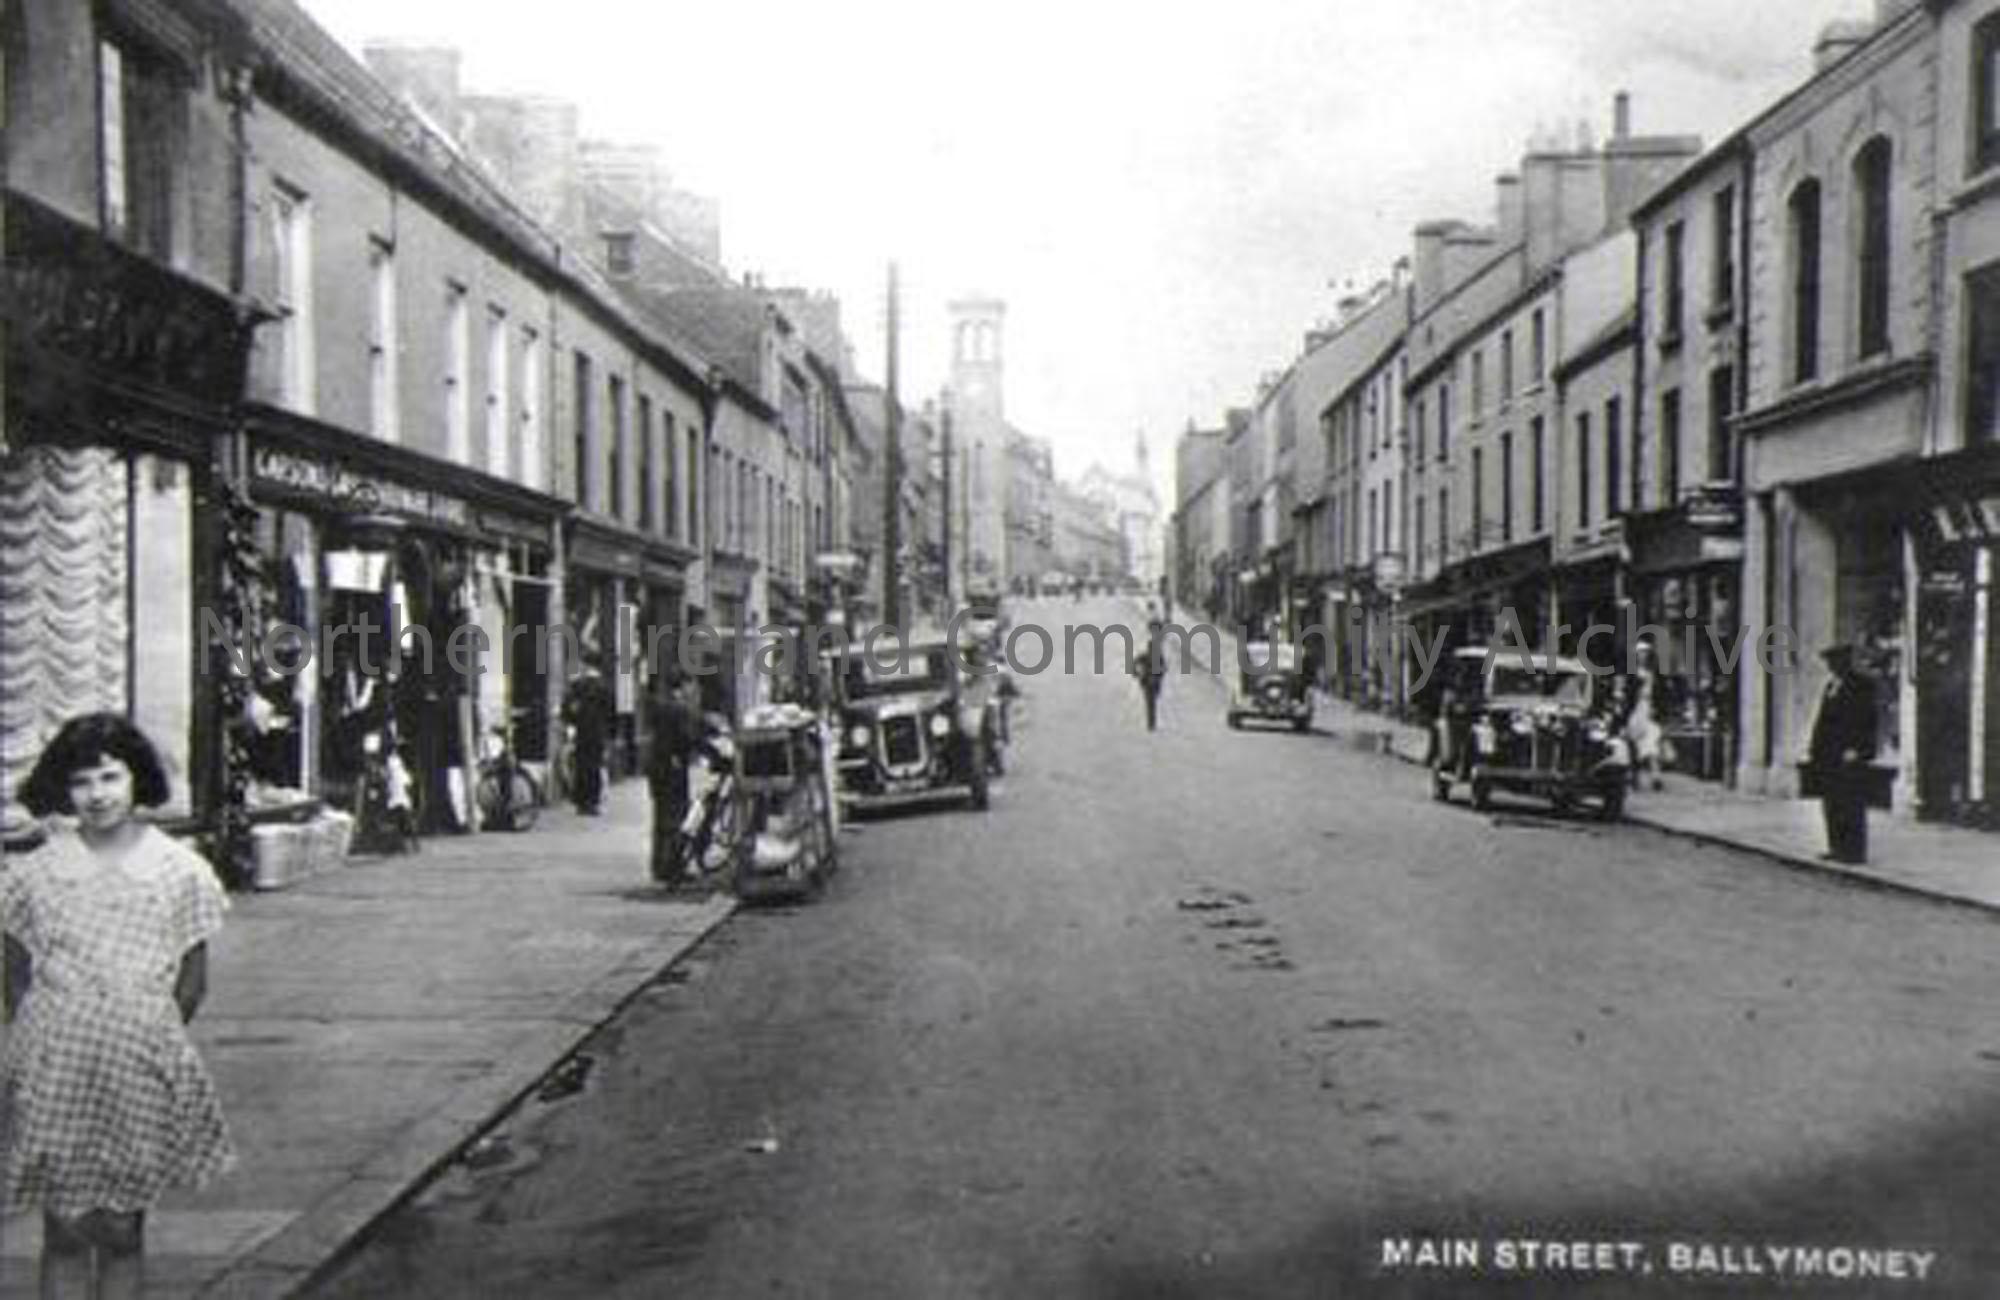 Main Street, Ballymoney. From a collection of photos donated by Raymond Wilson (5476)